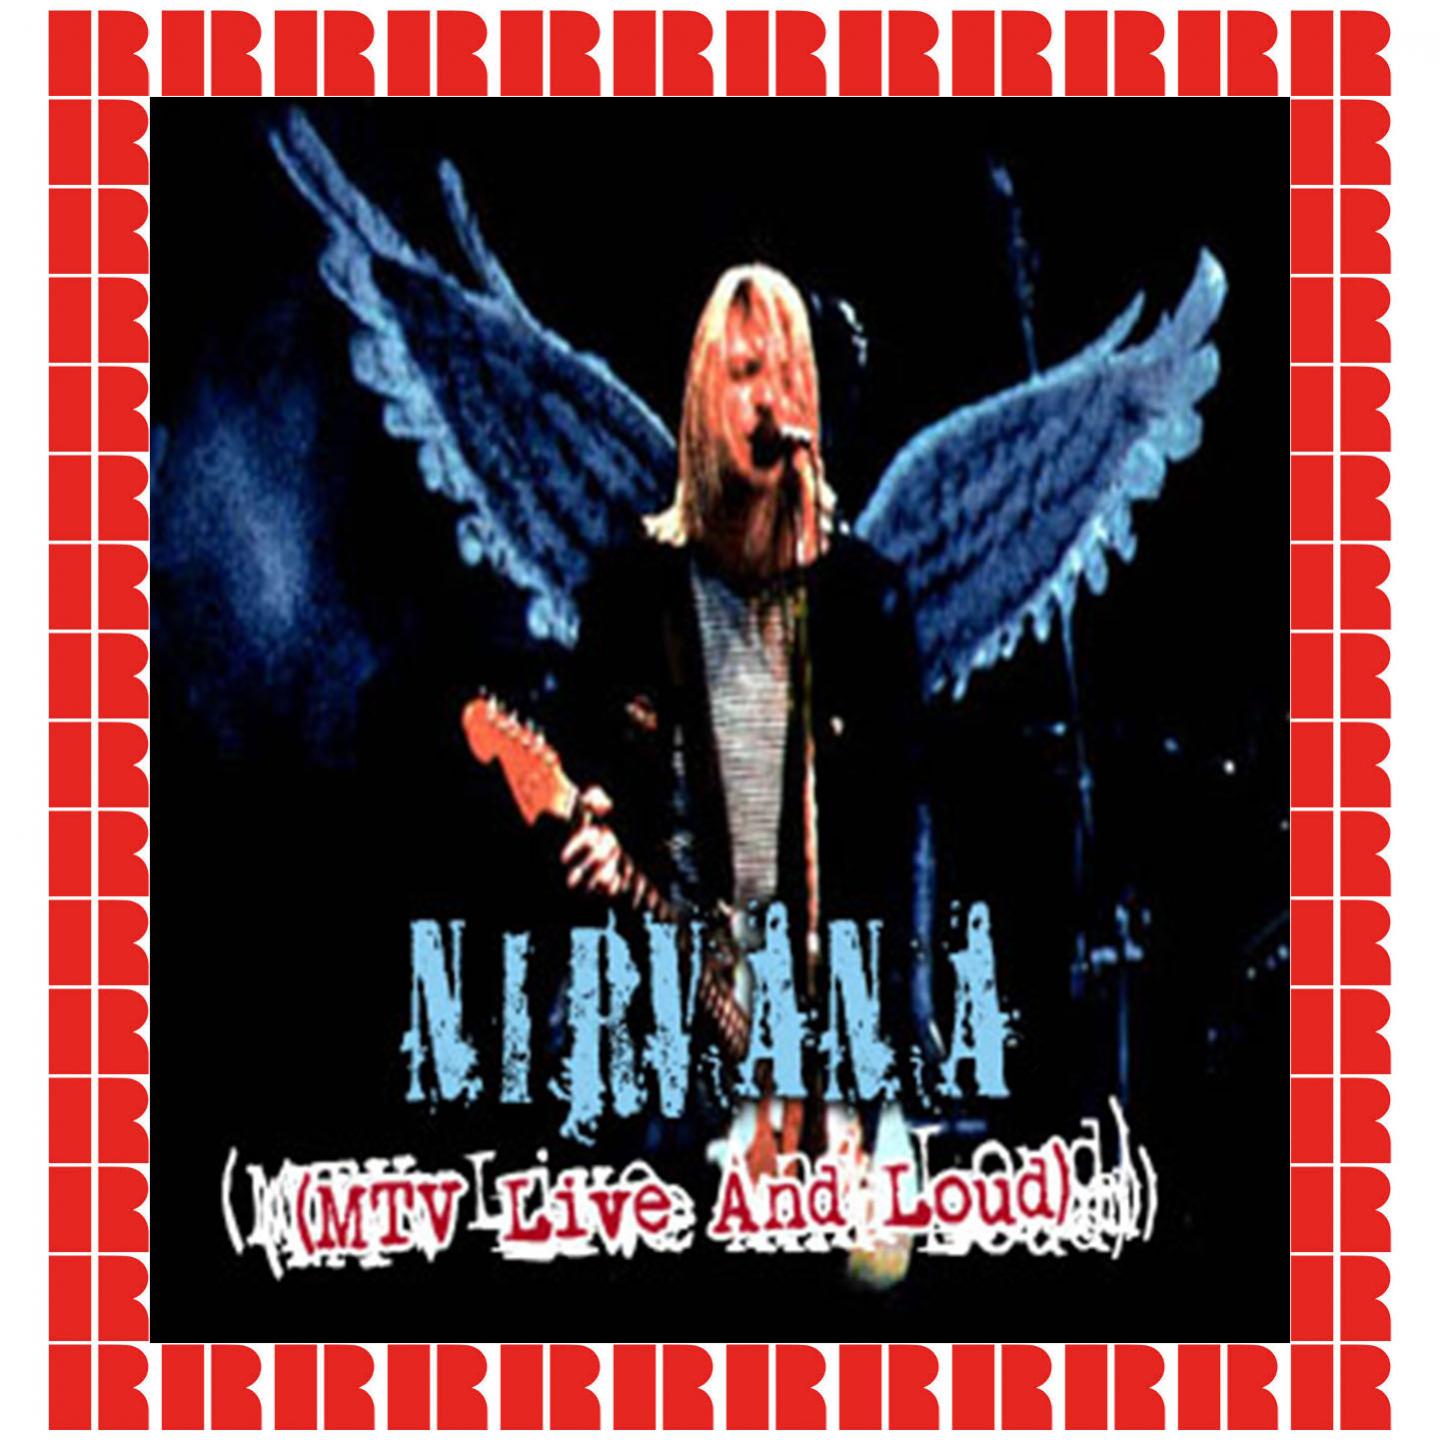 Scentless apprentice. Nirvana Live and Loud 1993. Nirvana MTV Live and Loud 1993. Nirvana MTV Live & Loud. Nirvana Live and Loud DVD.